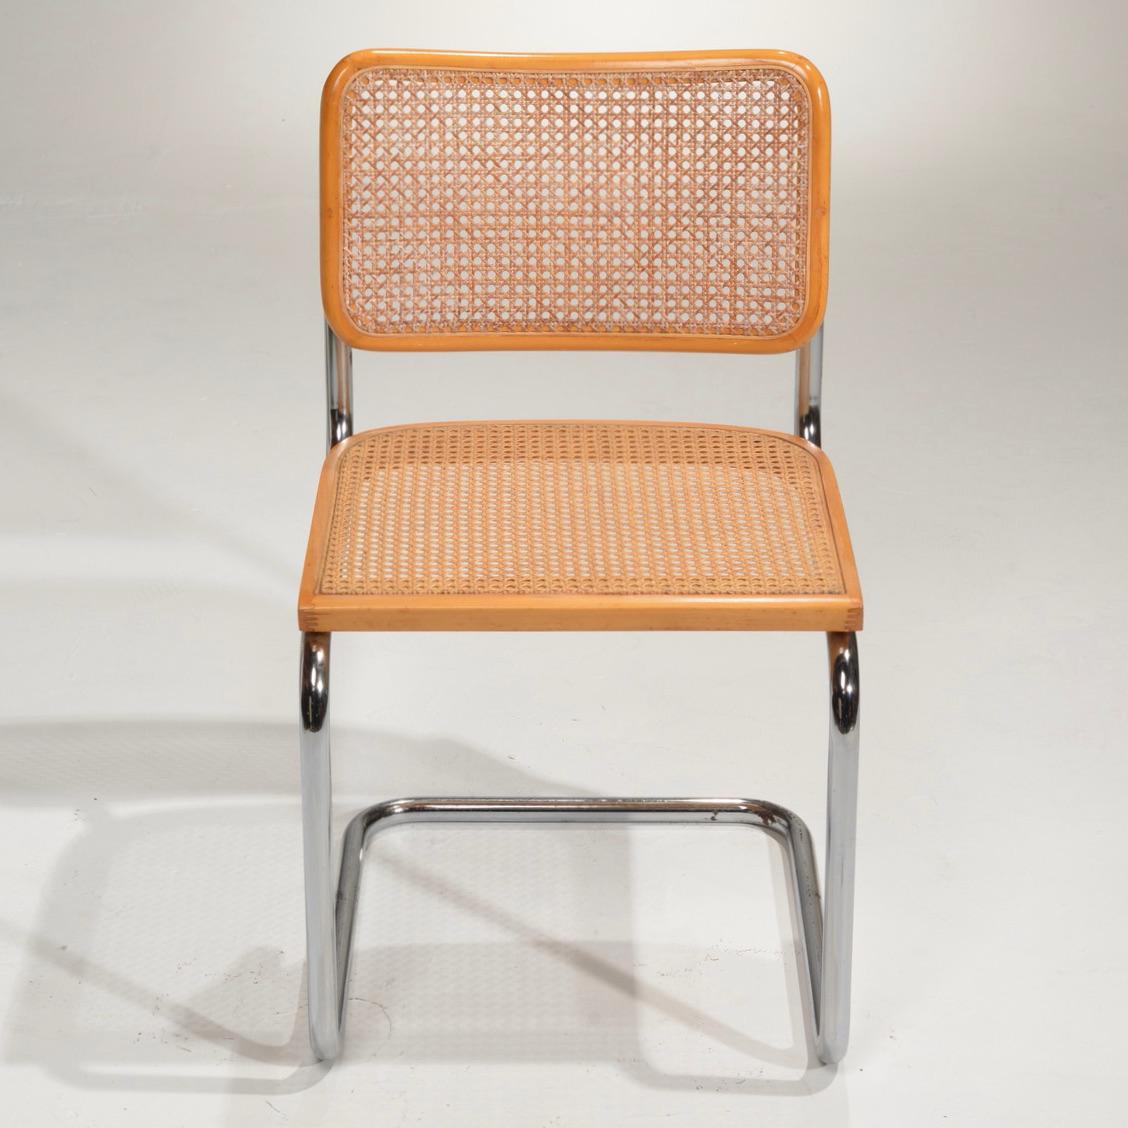 Marcel Breuer Cesca side chairs in natural finish. Cane seats and backs. Classic chrome cantilever frames.